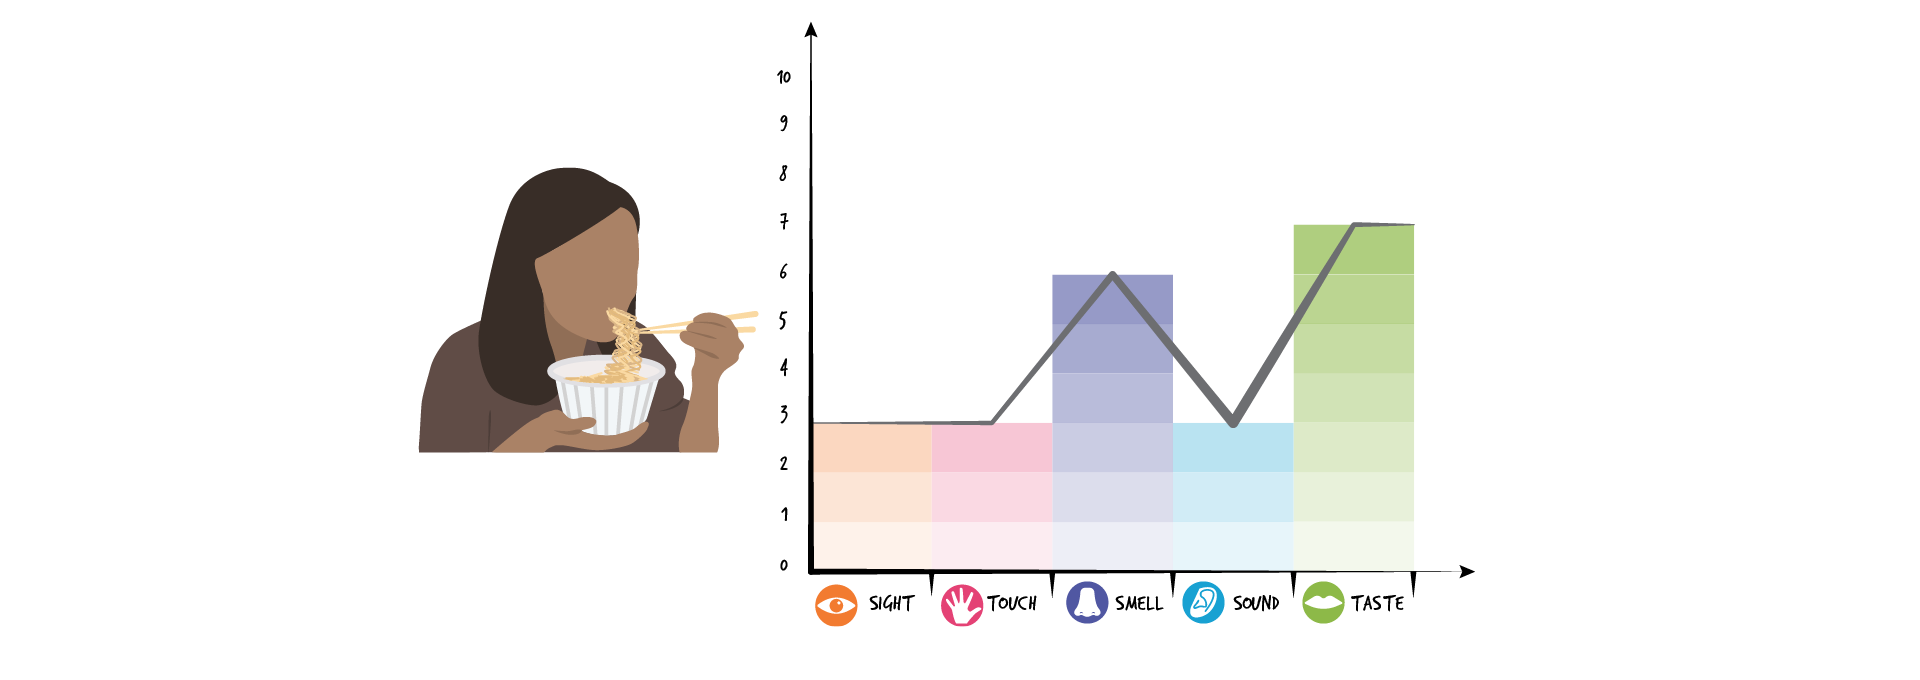 A person in a brown shirt eats noodles out of a bowl with chopsticks. Beside is a graph with a y-axis from 1-10 and an x-axis with five sections: orange eye icon for Sight, pink hand icon for Touch, purple nose icon for Smell, blue ear icon for Sound, and green lips icon for Taste. On the graph, orange goes up three sections, pink goes up three sections, purple goes up six sections, blue goes up three sections, green goes up seven section.